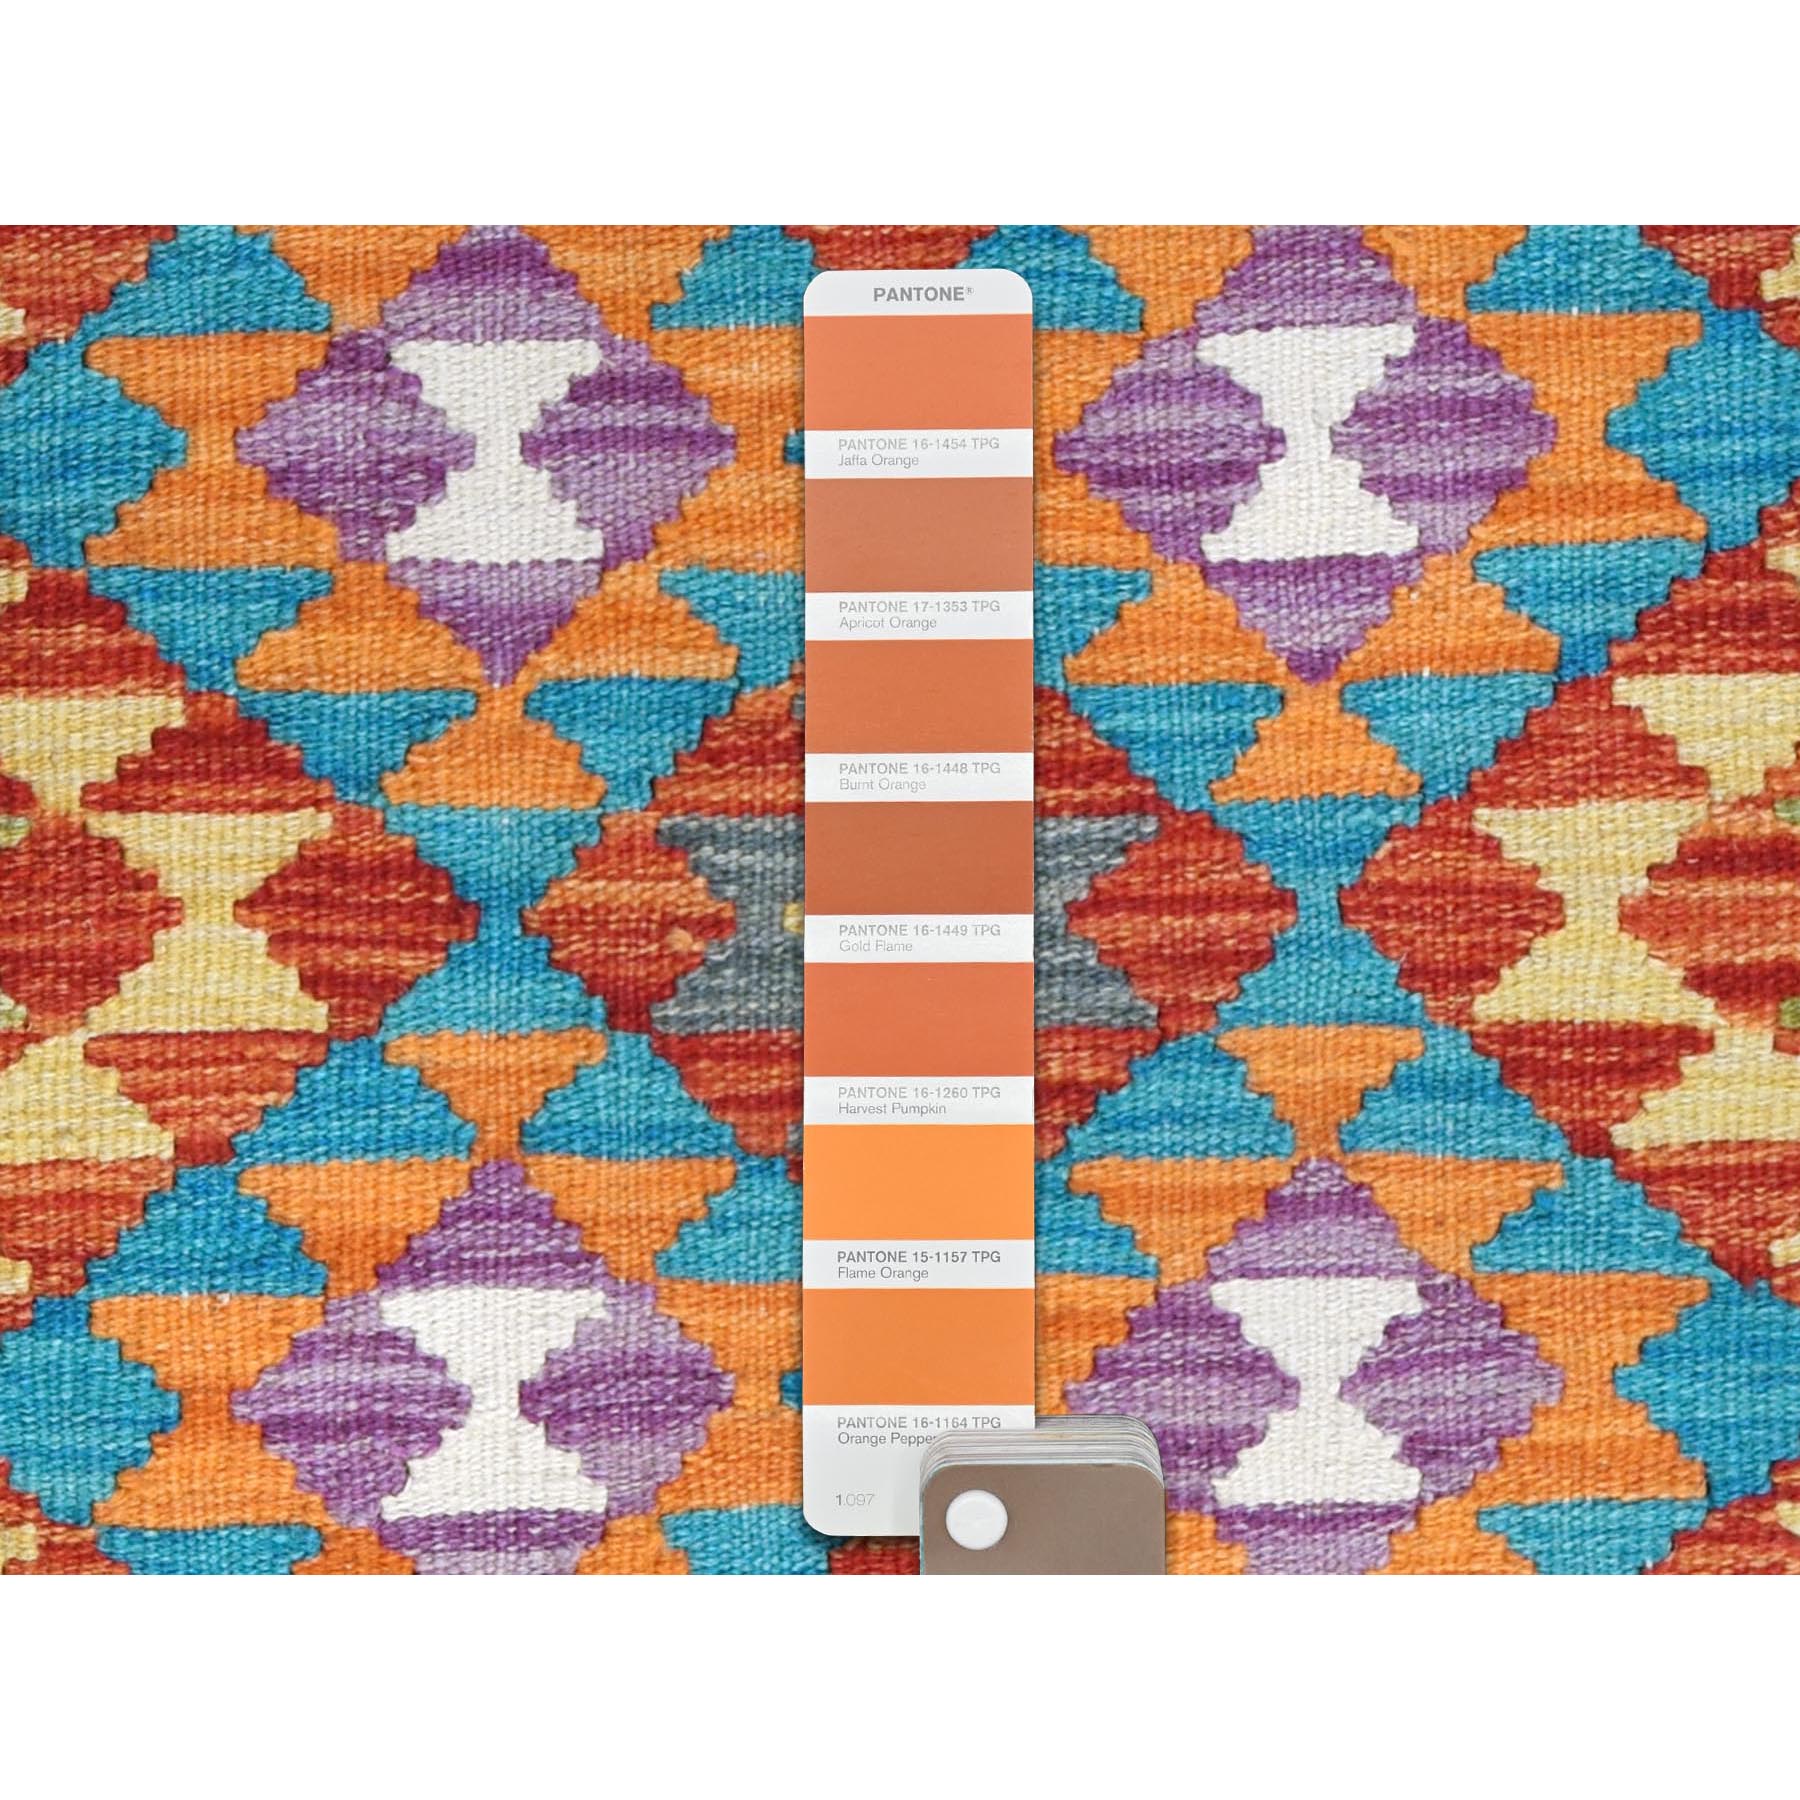 4'4"x6' Colorful, Flat Weave, Afghan Kilim with Geometric Design, Vibrant Wool, Hand Woven, Vegetable Dyes, Reversible Oriental Rug 